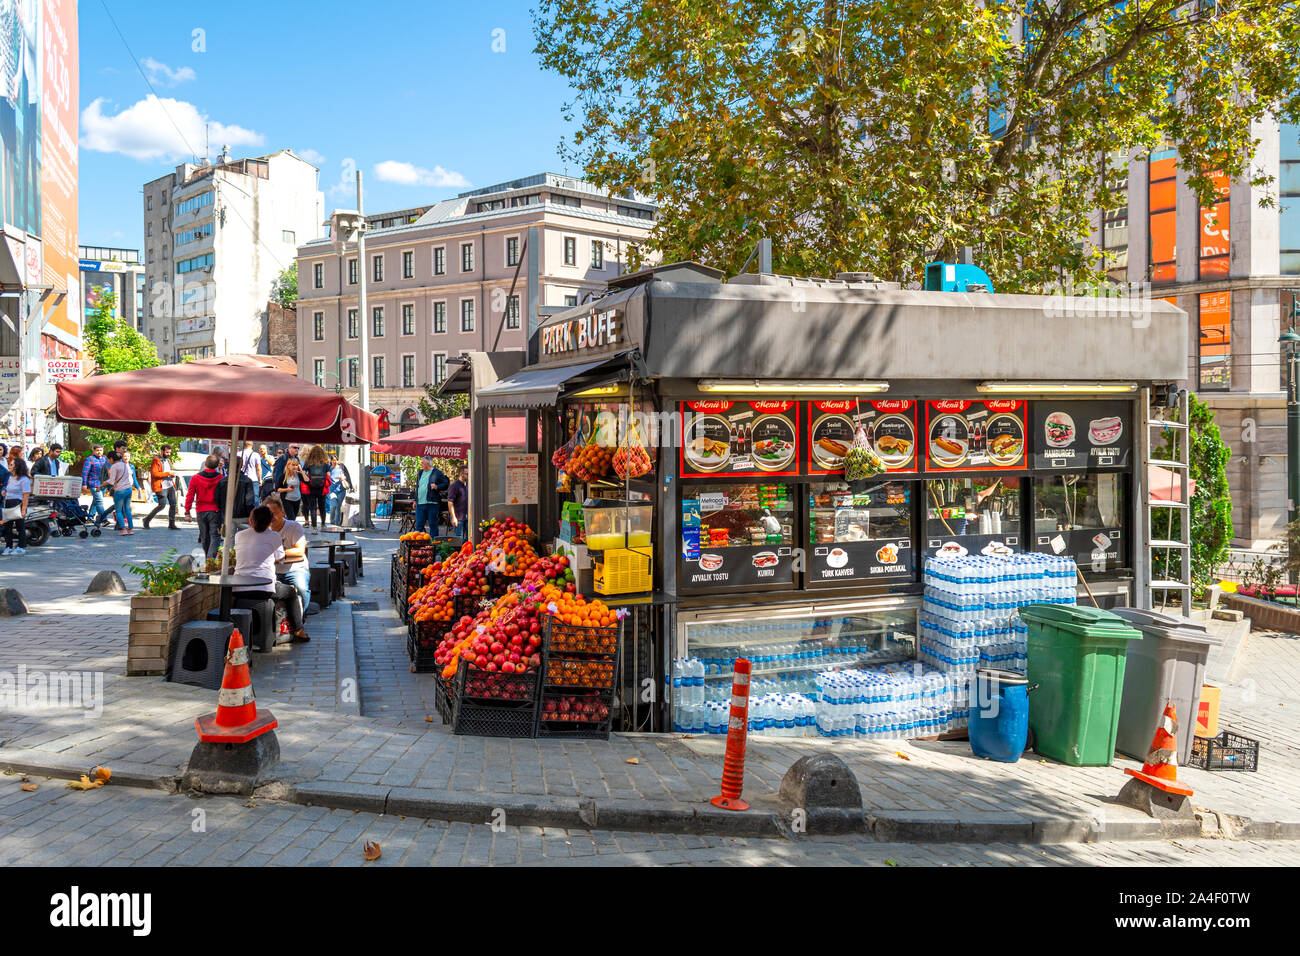 Tourists and Turks visit an outdoor market featuring fruit, produce and groceries in the Galata district near the bridge and the Golden Horn in Istanb Stock Photo